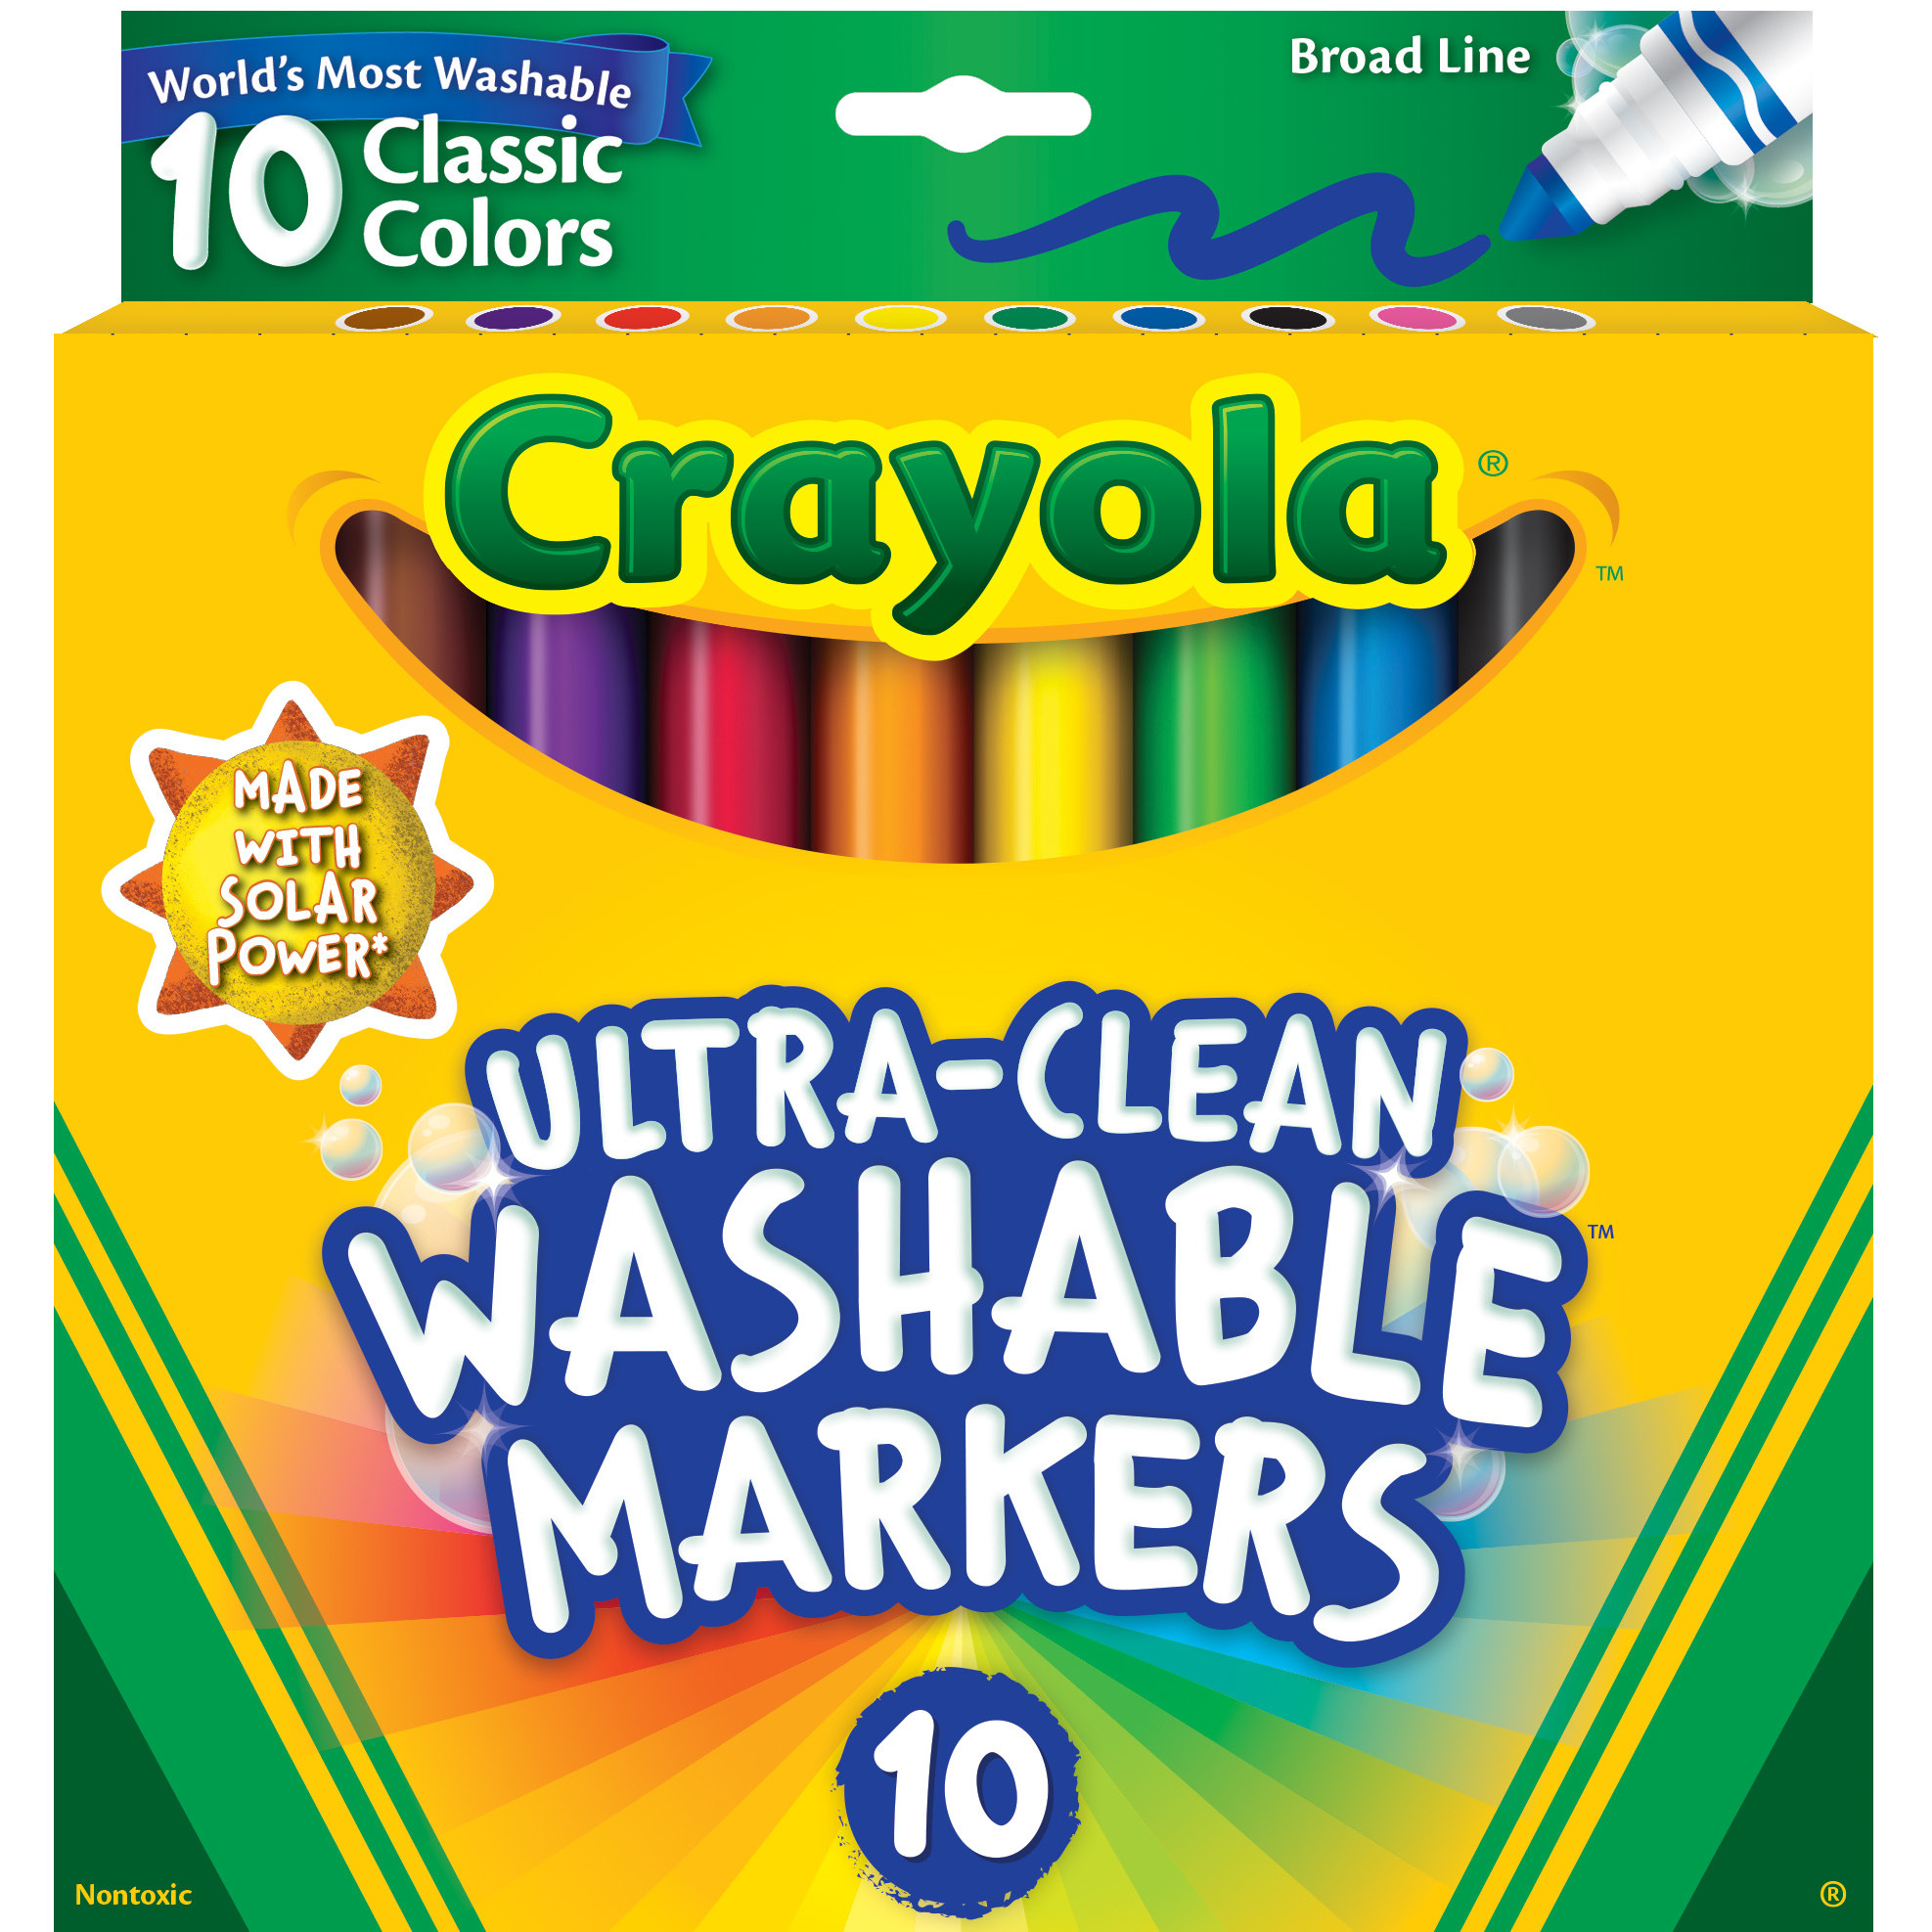 Crayola Ultra-Clean Washable Broad Line Markers, School & Art Supplies, 10 Ct - image 1 of 9